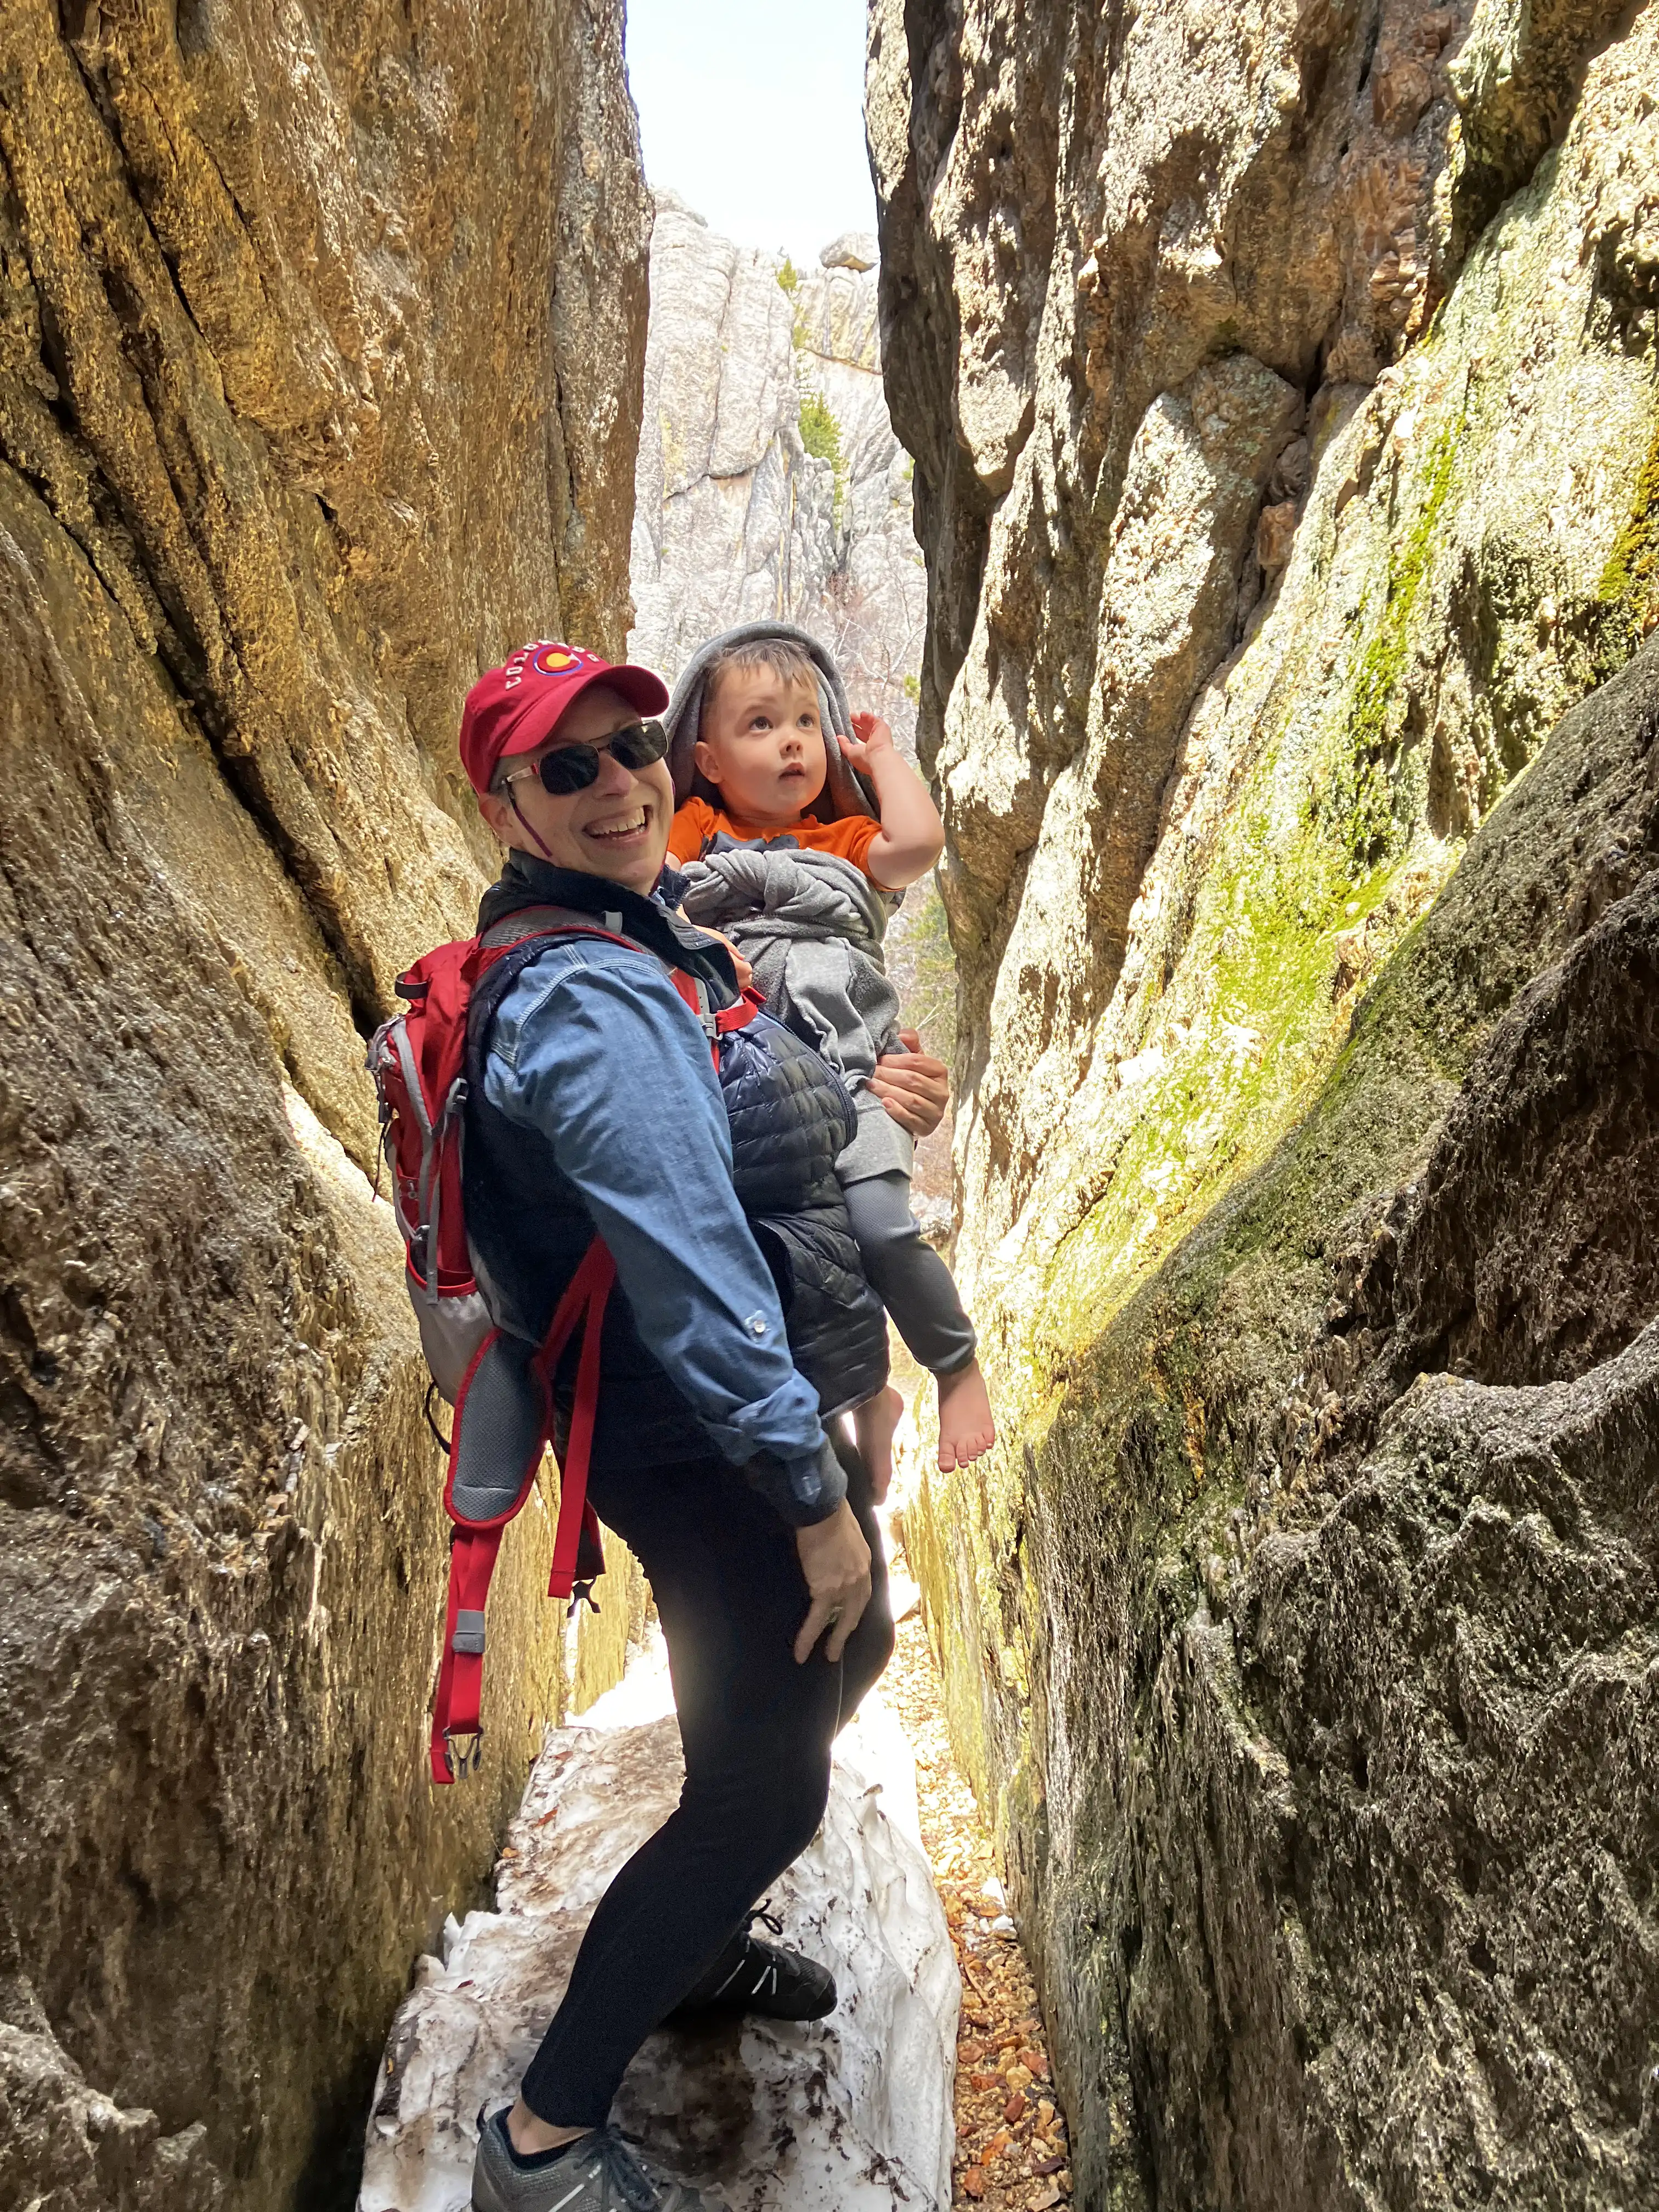 Kati holding Royal on a hiking trail in a crevasse.